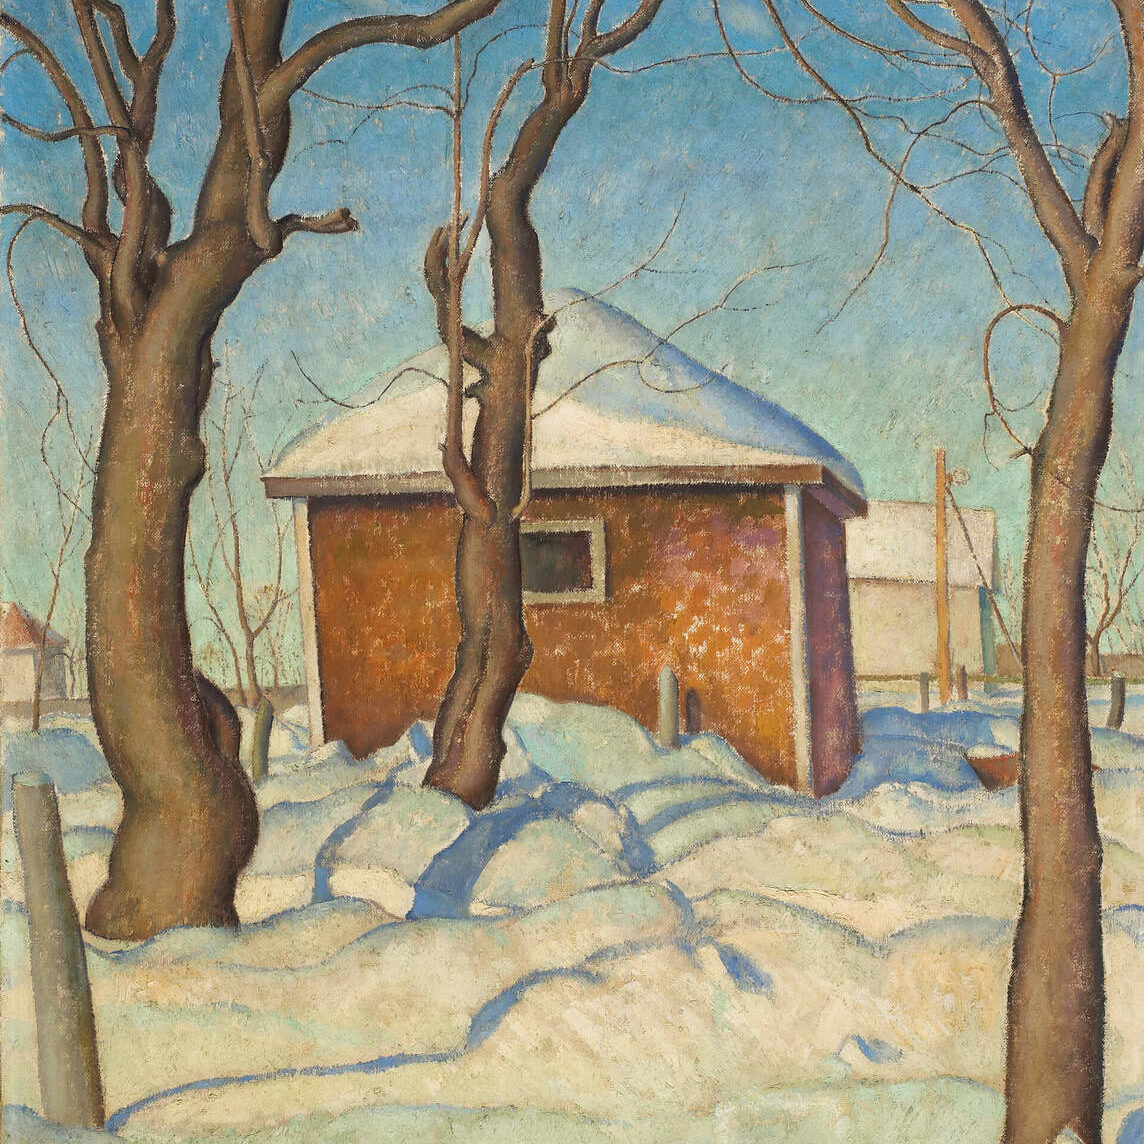 The image is a painting titled "Williamson's Garage" by Lionel LeMoine FitzGerald, created in 1927. The painting depicts a winter scene featuring a small, rustic garage with a snow-covered roof. The garage is set against a backdrop of a clear blue sky. In the foreground, there are several bare trees with twisting, leafless branches, adding a sense of depth and texture to the composition. The ground is blanketed in thick, undisturbed snow, casting soft blue shadows that contrast with the warm tones of the garage. The overall atmosphere is serene and quiet, capturing the stillness of a winter day.